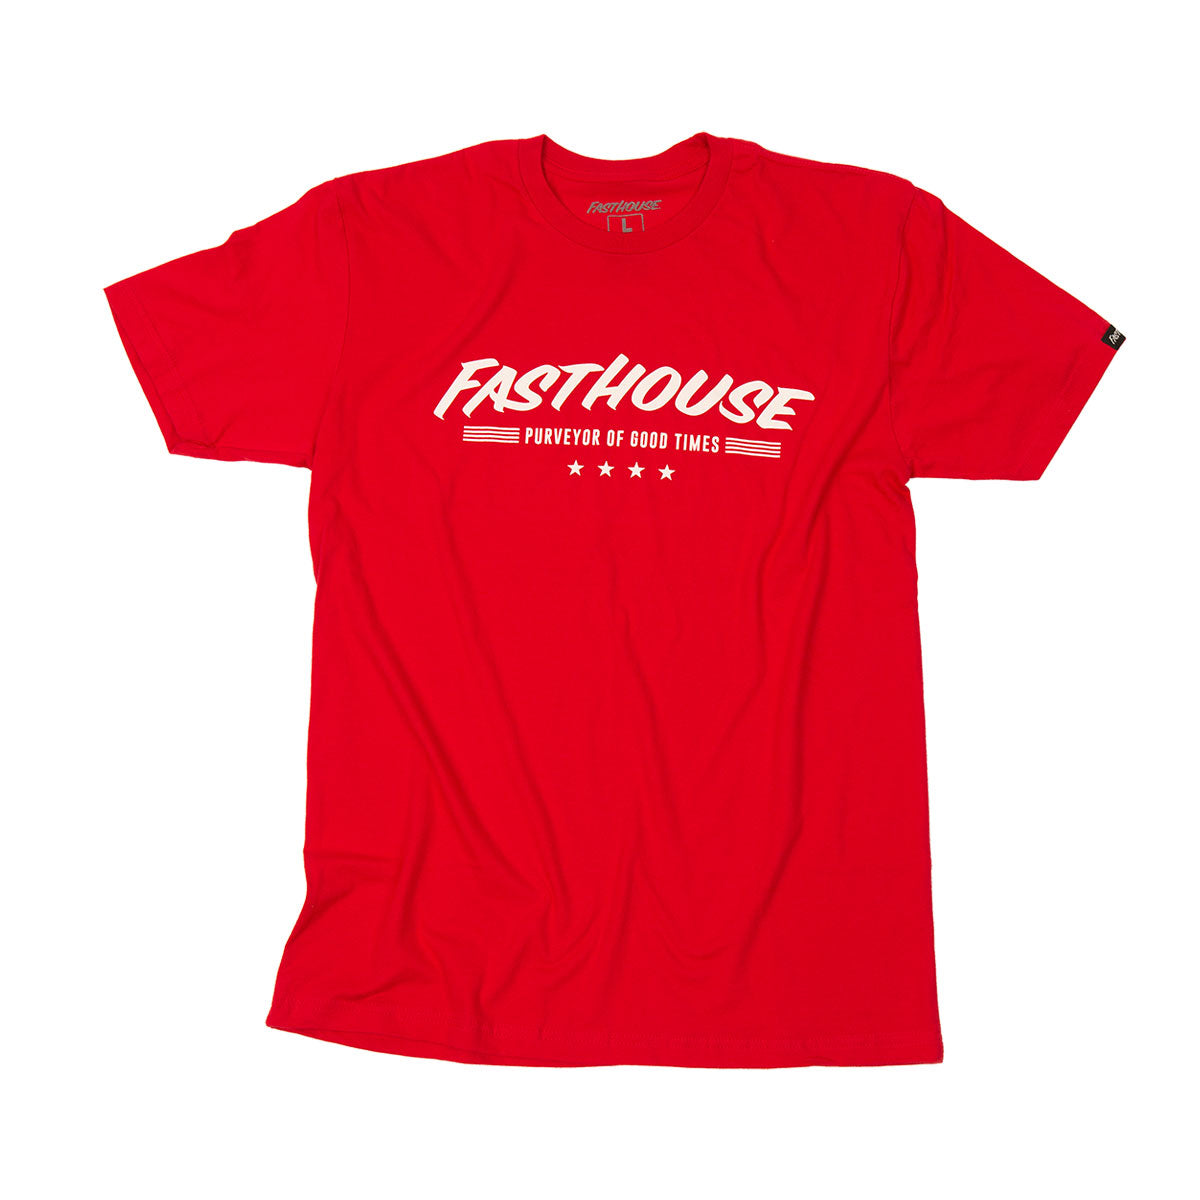 Fasthouse - Four Stars Youth Tee - Red